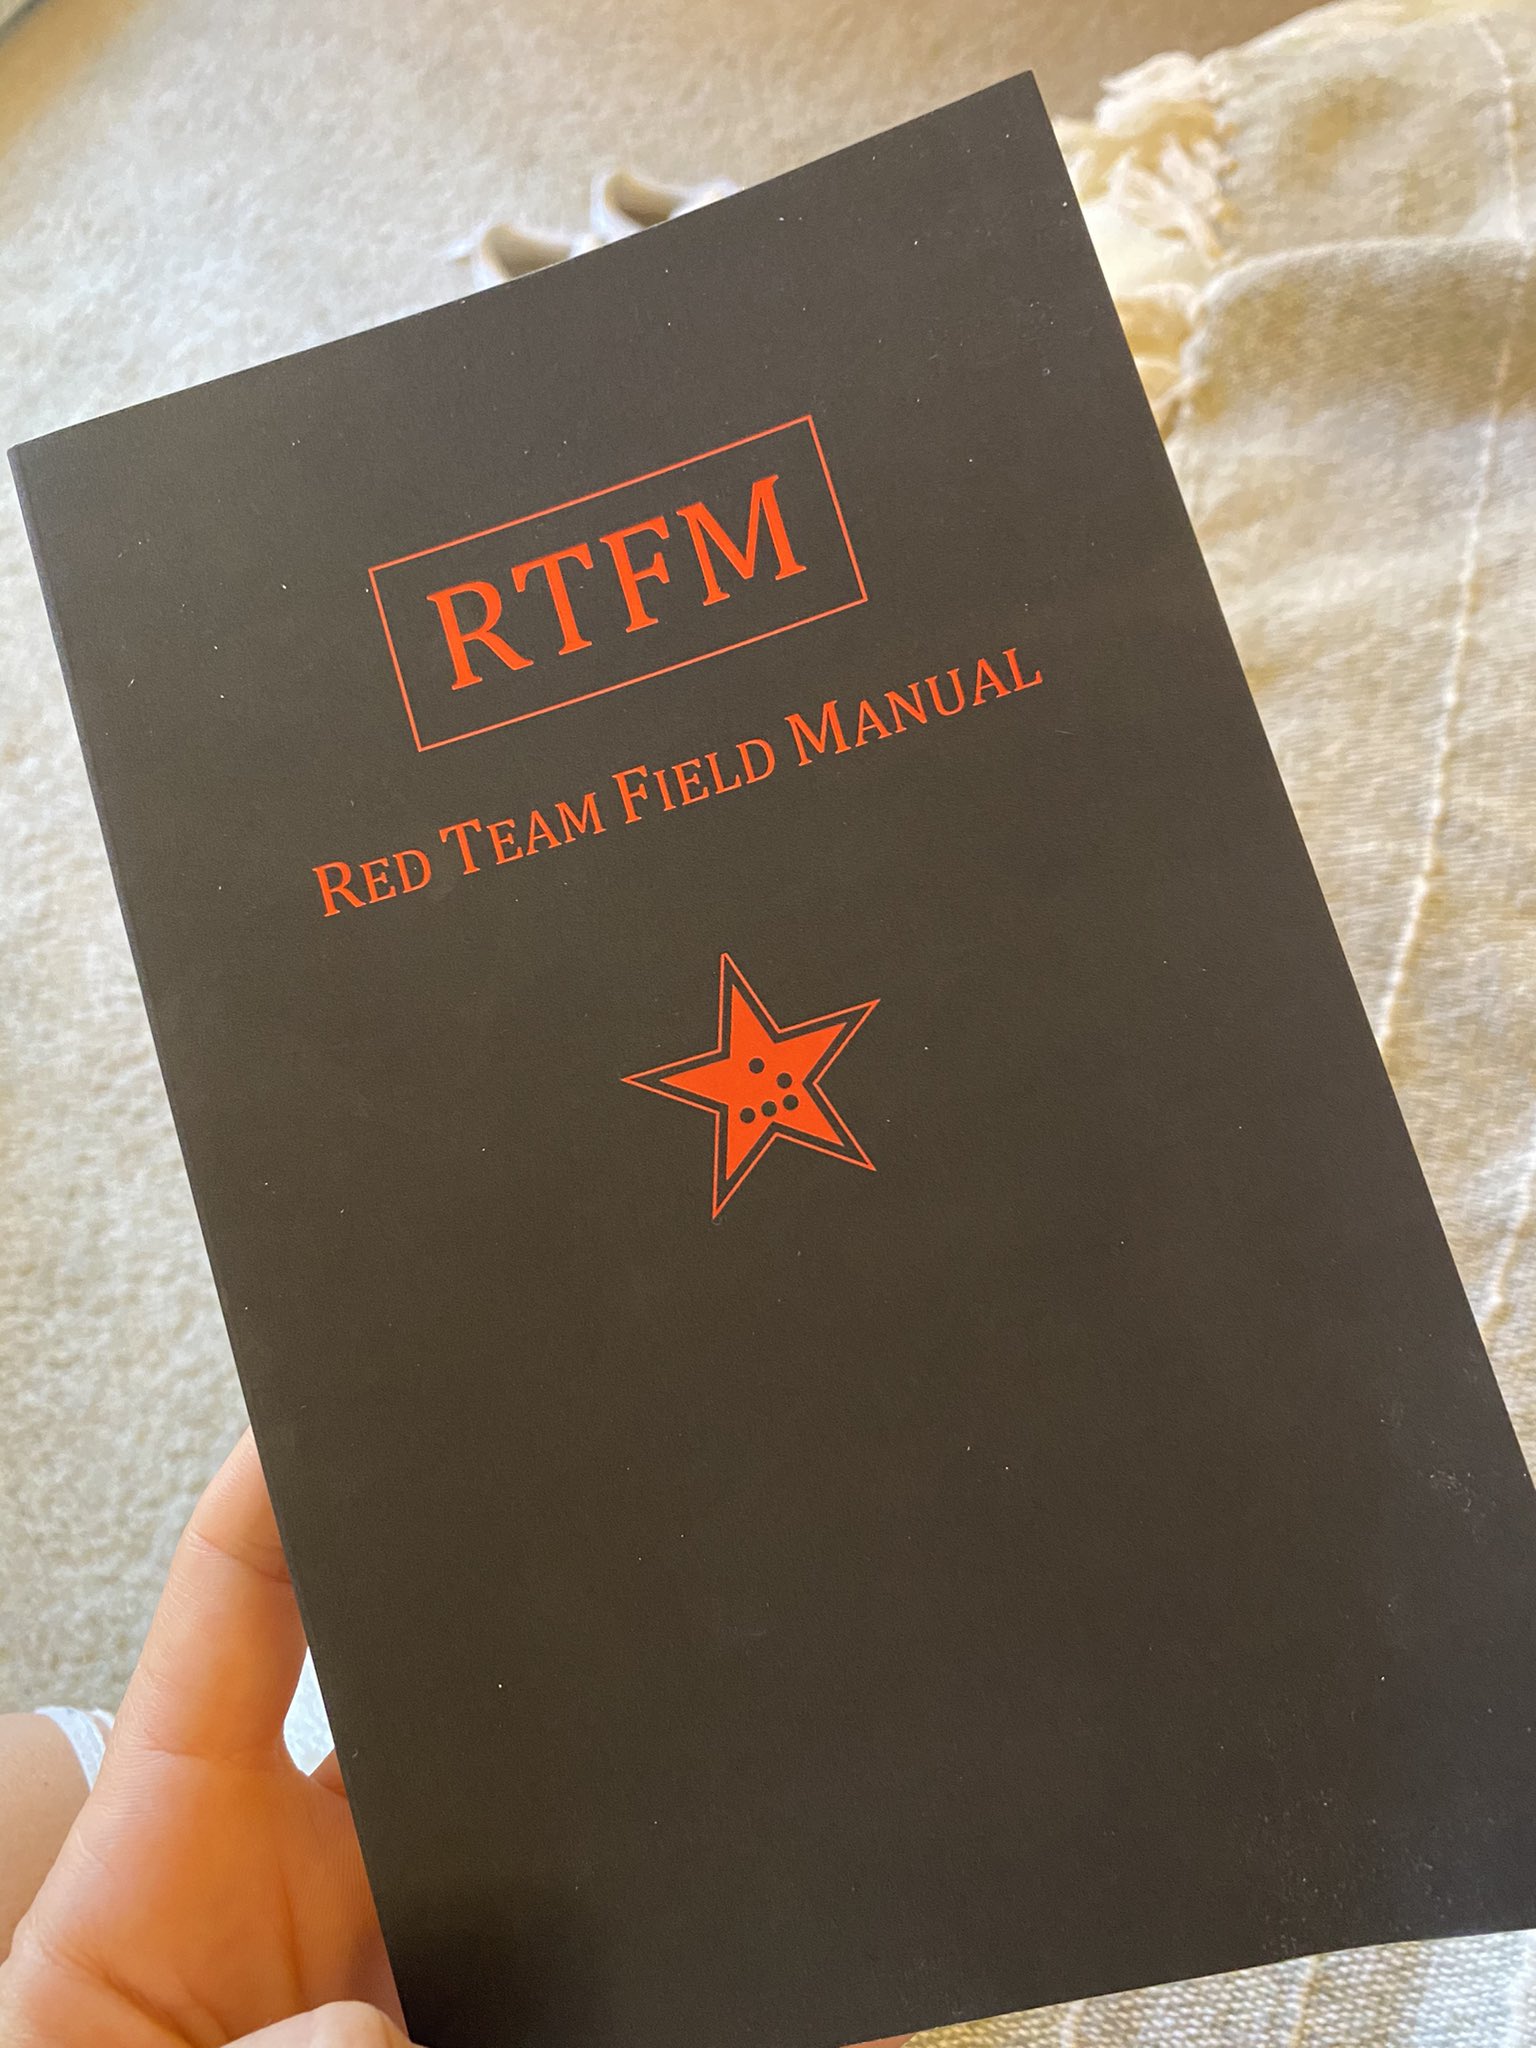 farvel Mesterskab Resistente 𝗛𝟯𝗞𝗧l𝗖 on Twitter: "My favorite little non-comprehensive  communist-looking red team reference not-a-manual manual.  https://t.co/3hQvp6RA2p" / Twitter